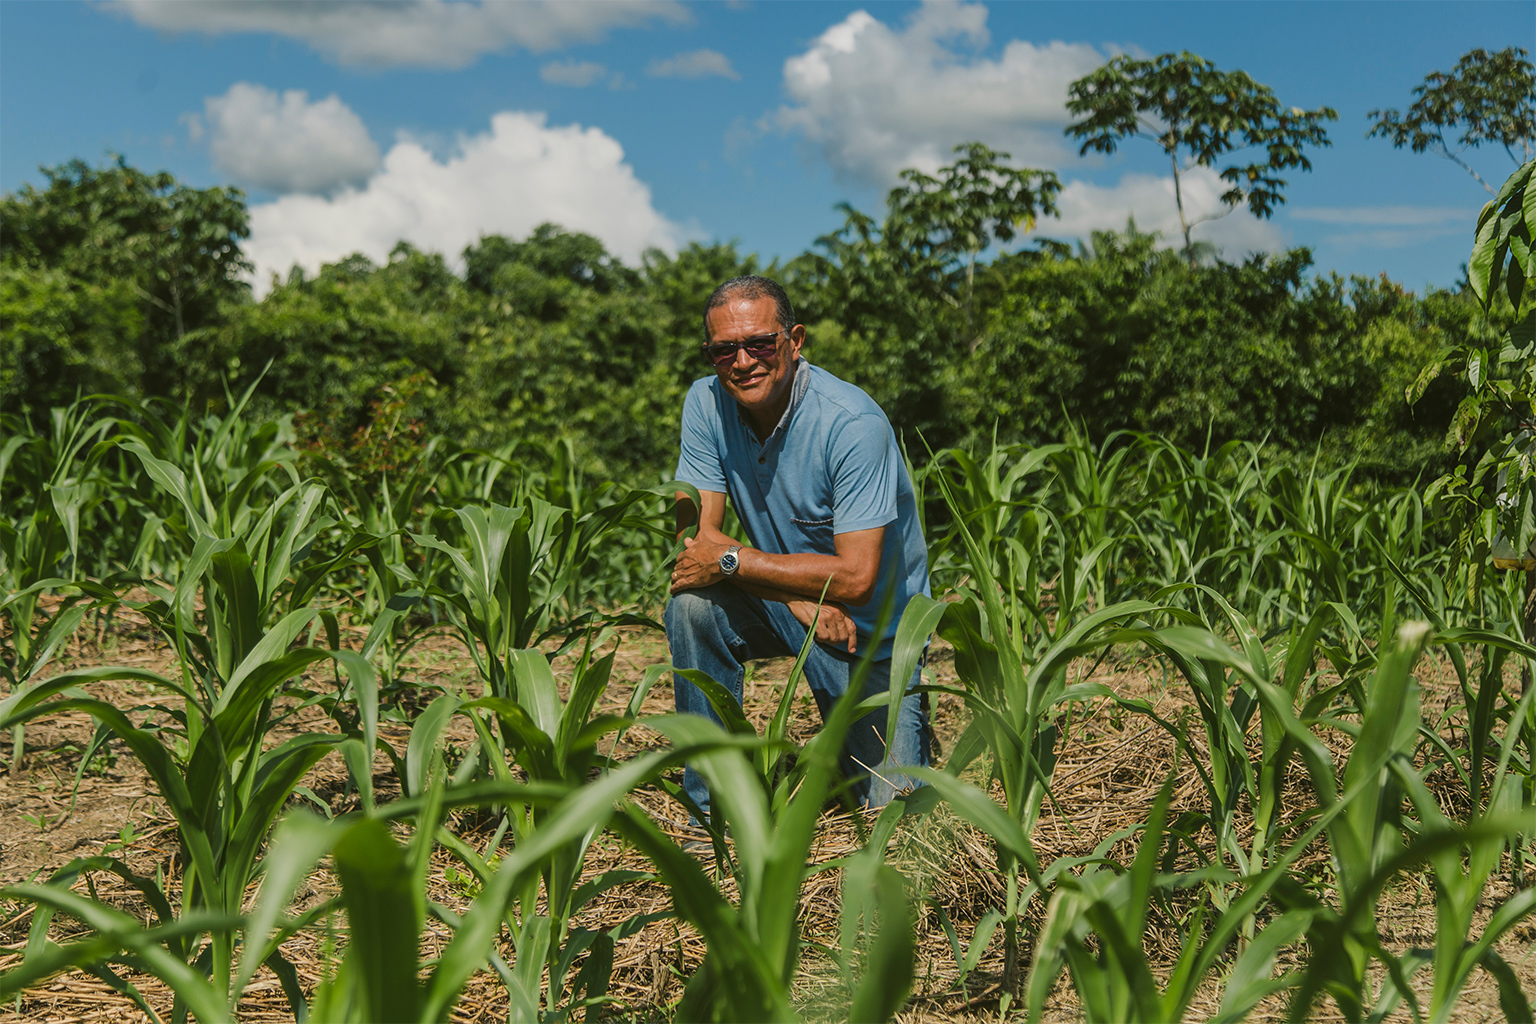 Senior Researcher at Imazon Paulo Amaral is skeptical that ranchers and farmers would embrace agroforestry and carbon capture. 